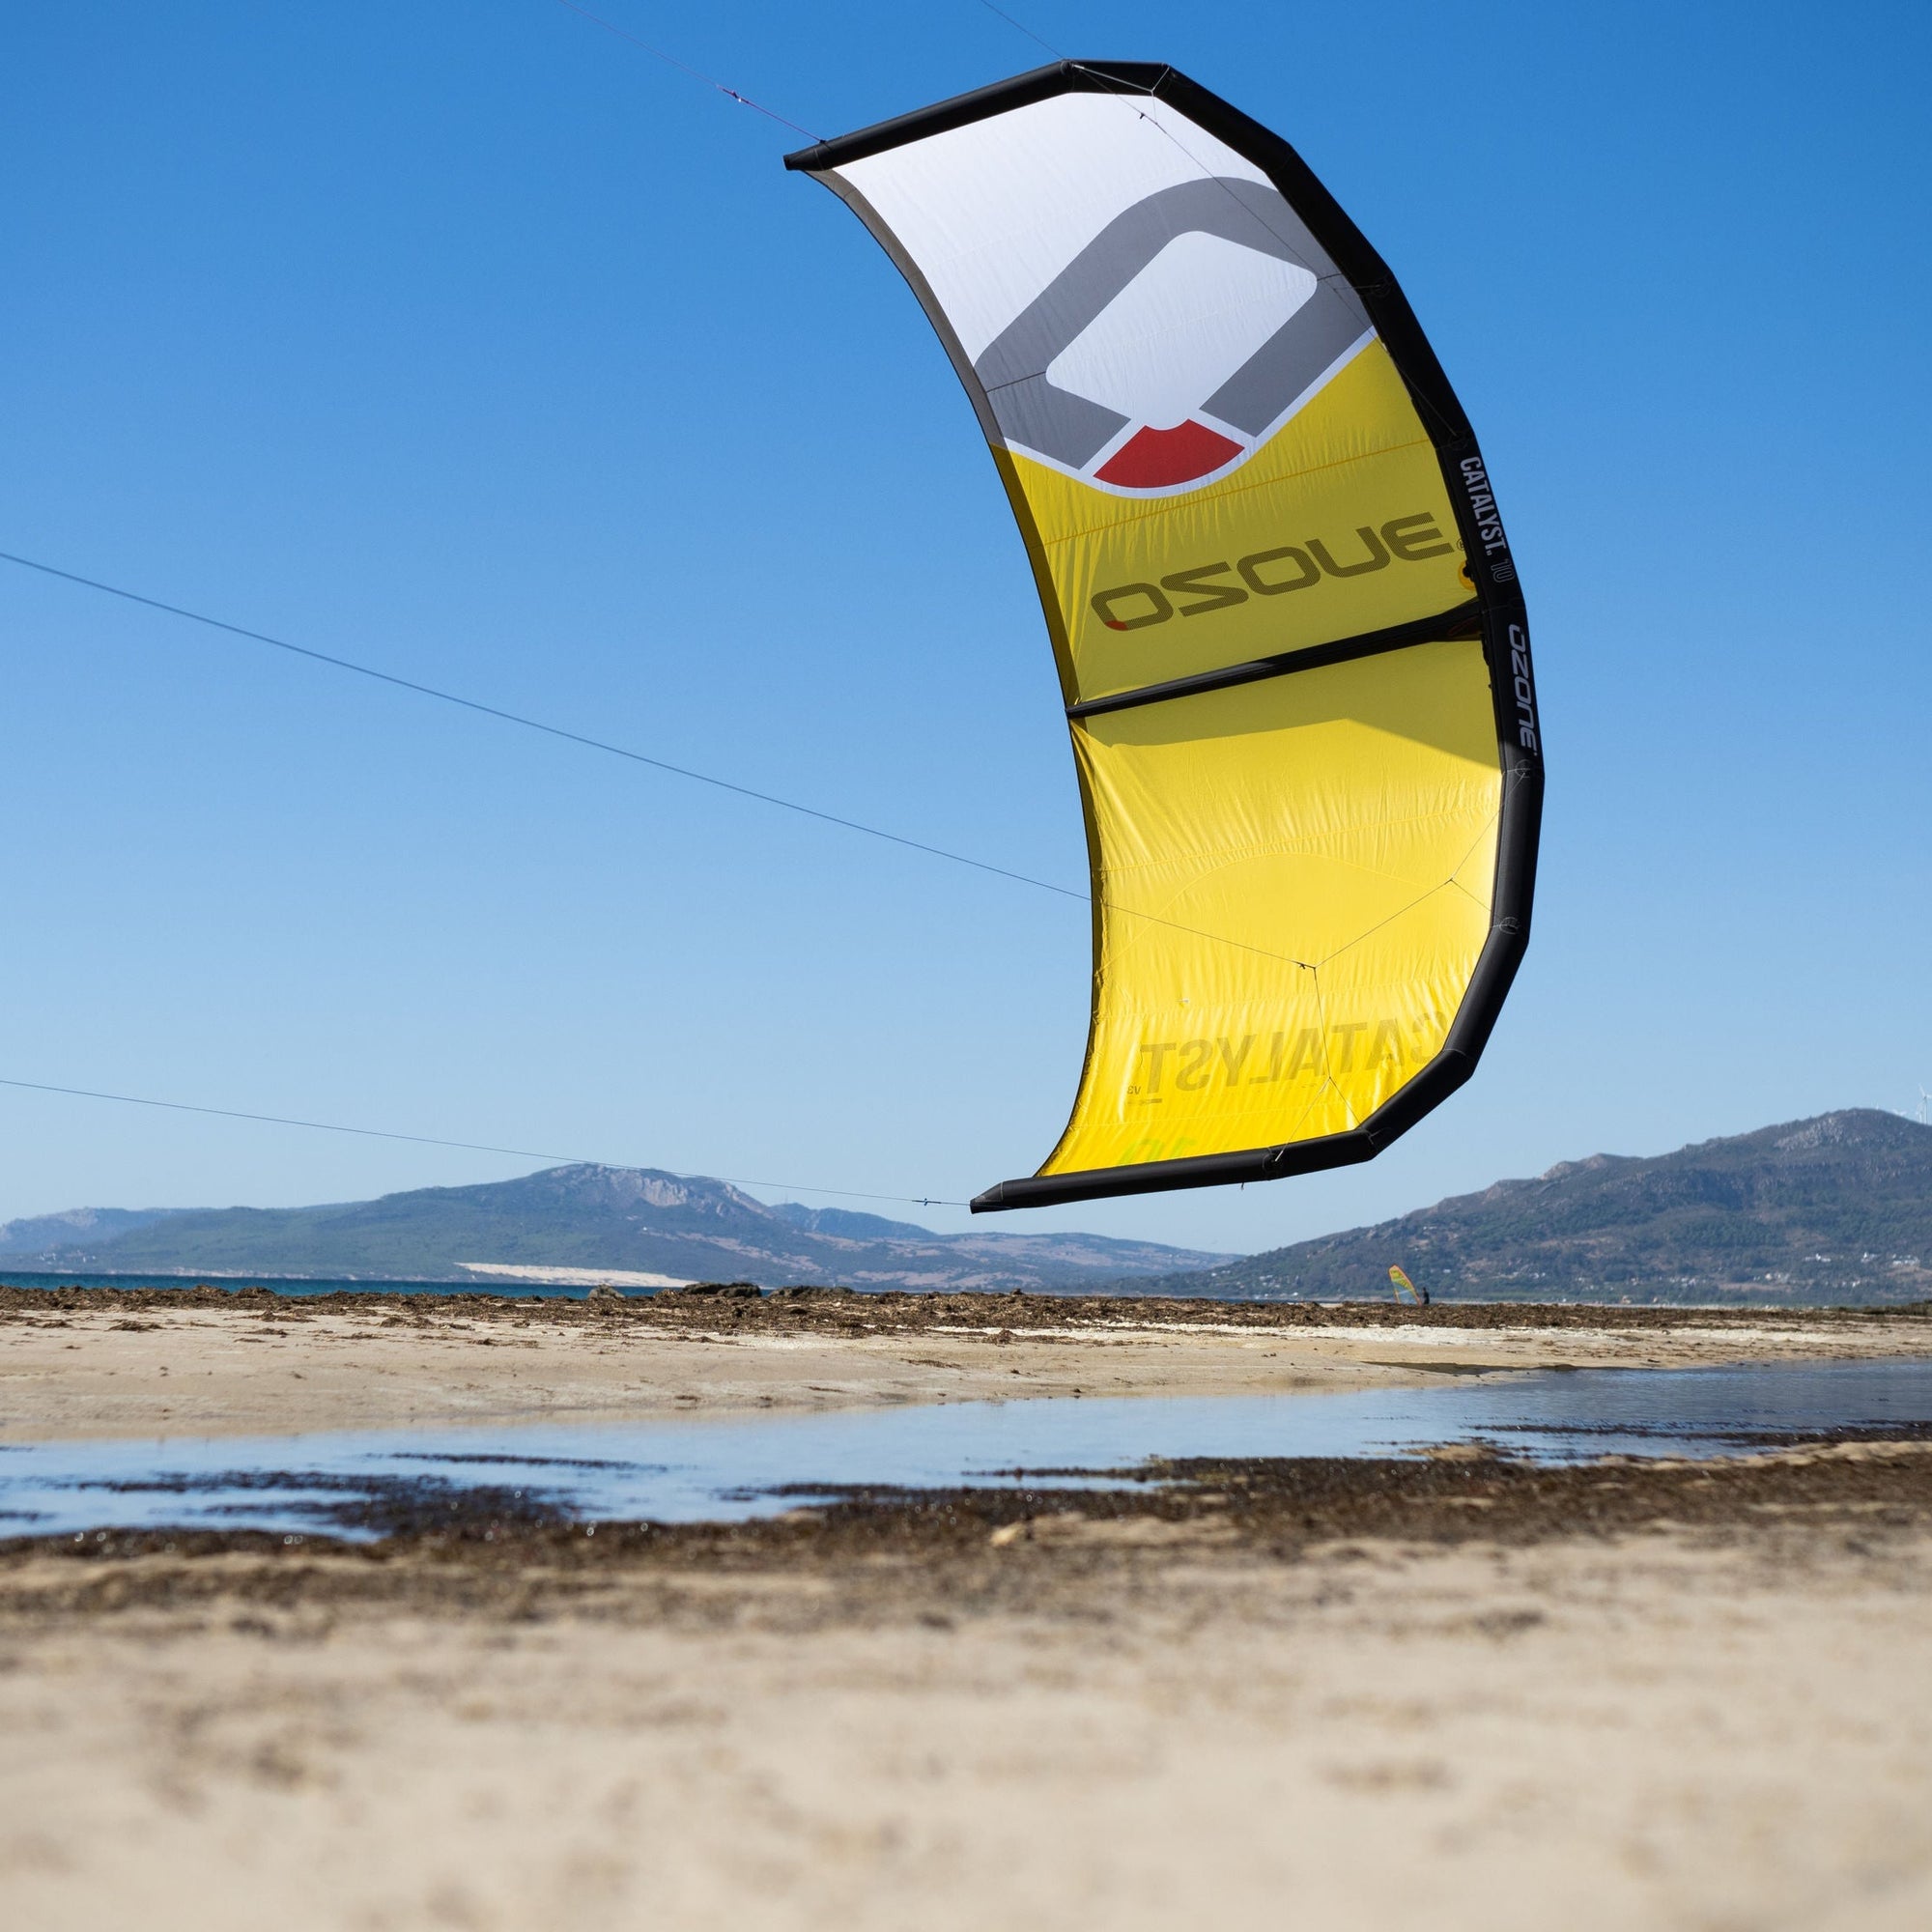 The Ozone Catalyst V3 in yellow flying above a beach in clear blue sky.